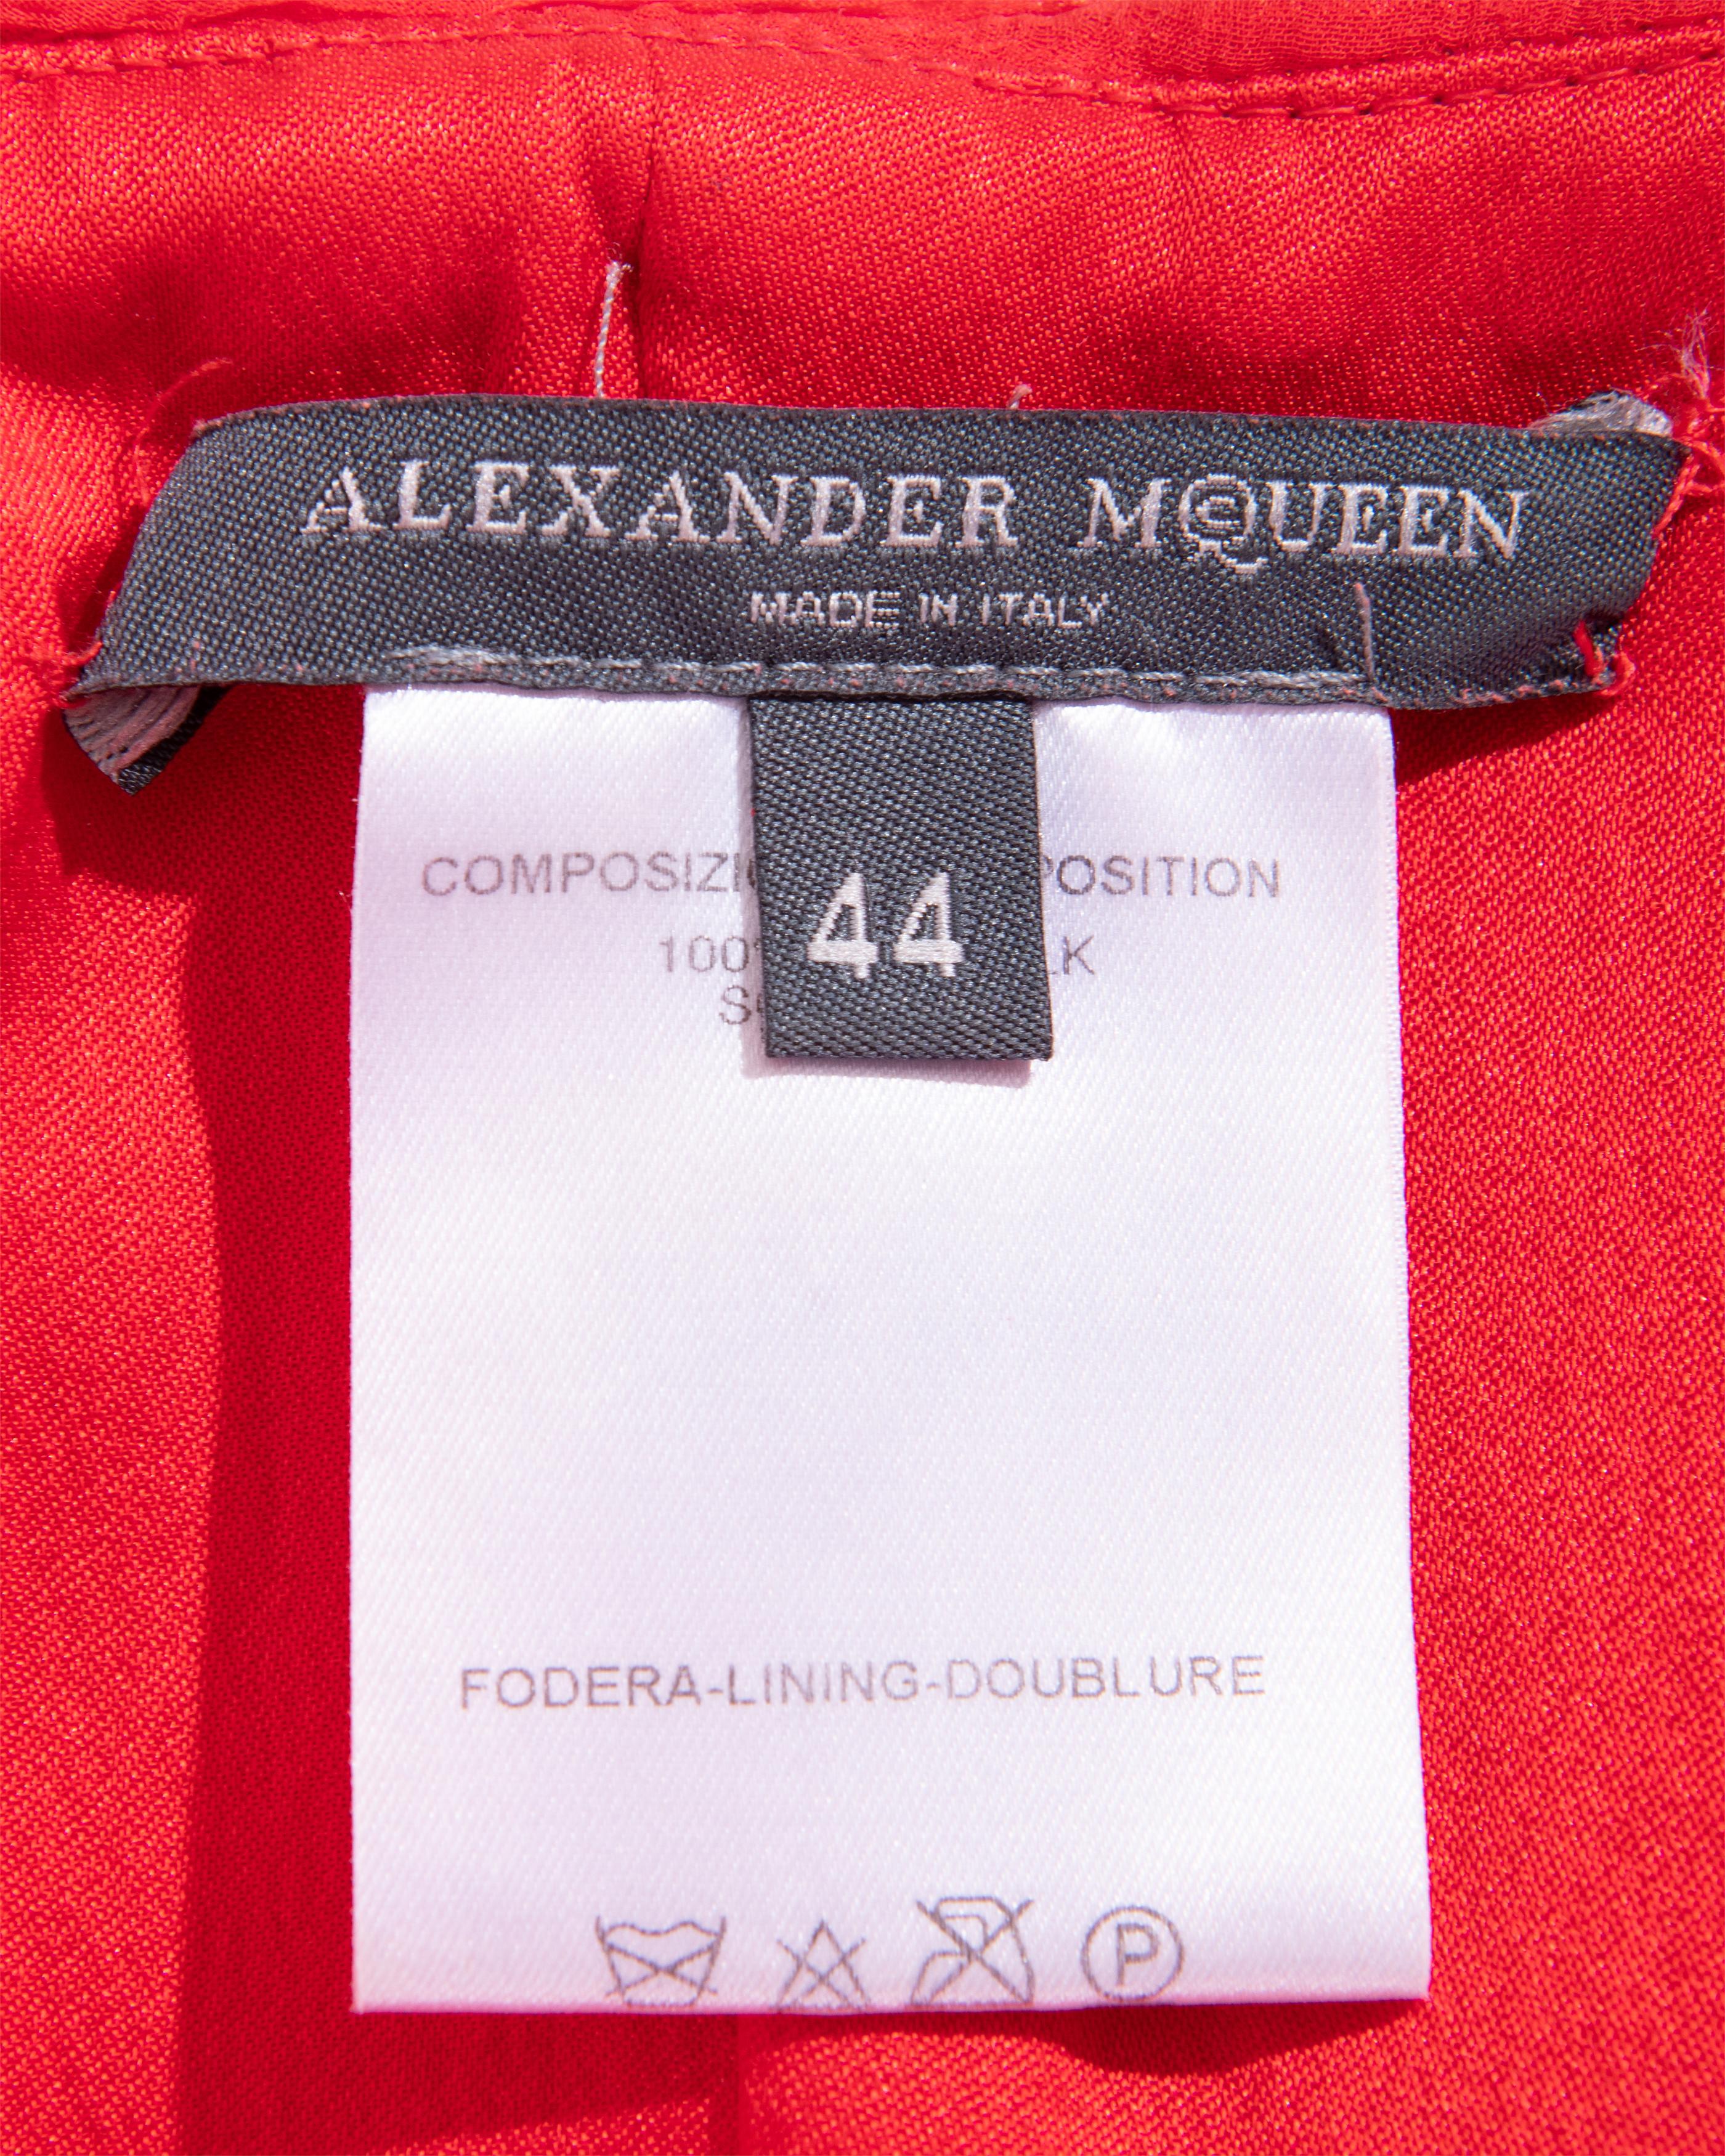 S/S 2003 Alexander McQueen  'Irere' Collection Red Silk Chiffon Gown with Sash 15